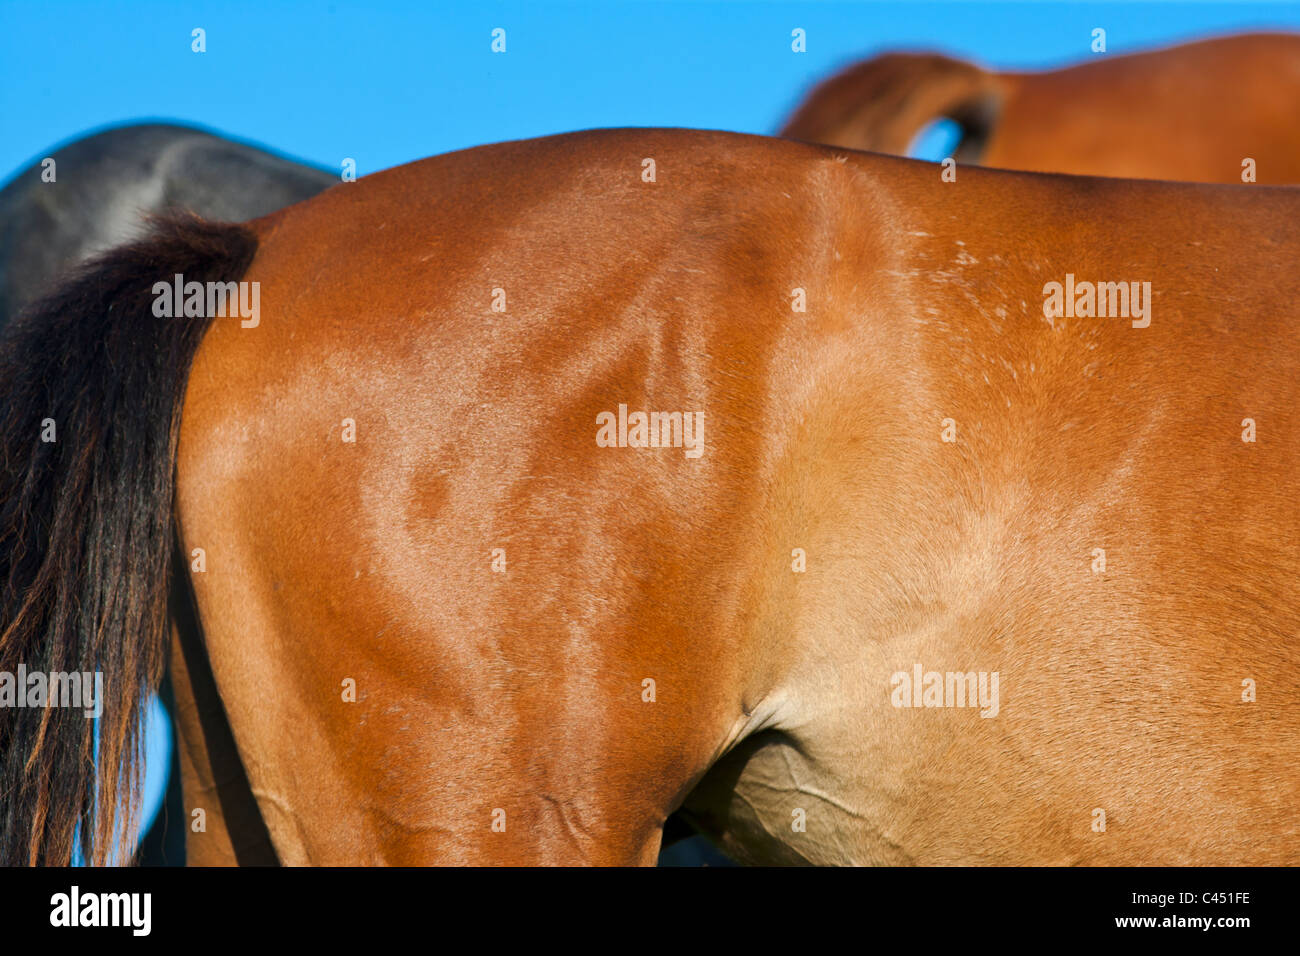 Horse's tail and behind Stock Photo